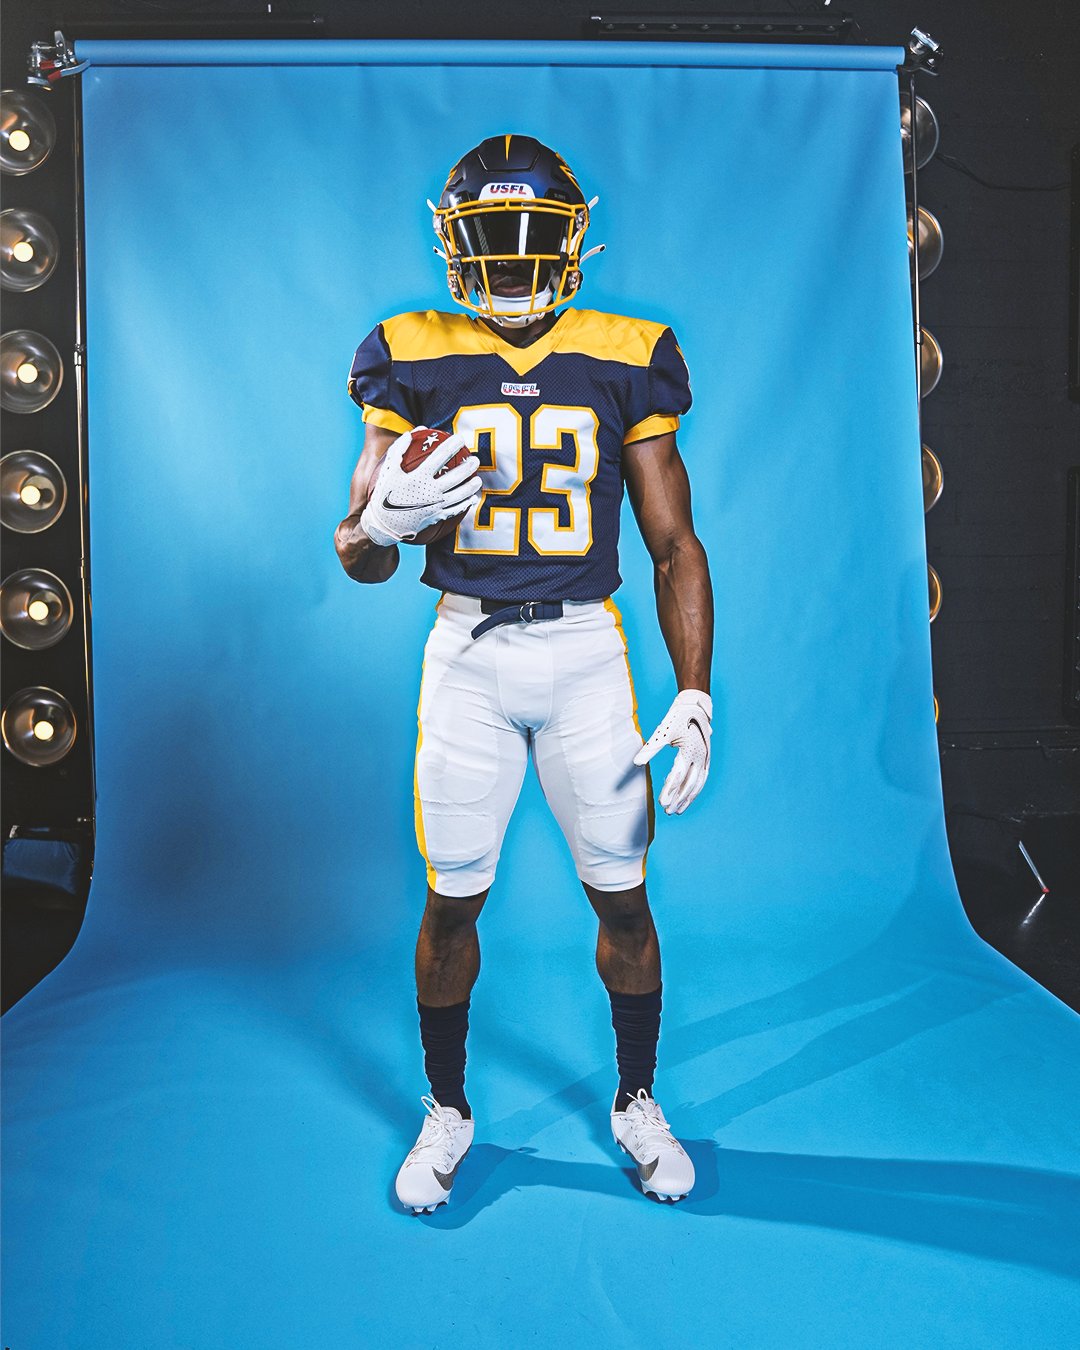 USFL Michigan Panthers Uniform Reveal: First look at jerseys